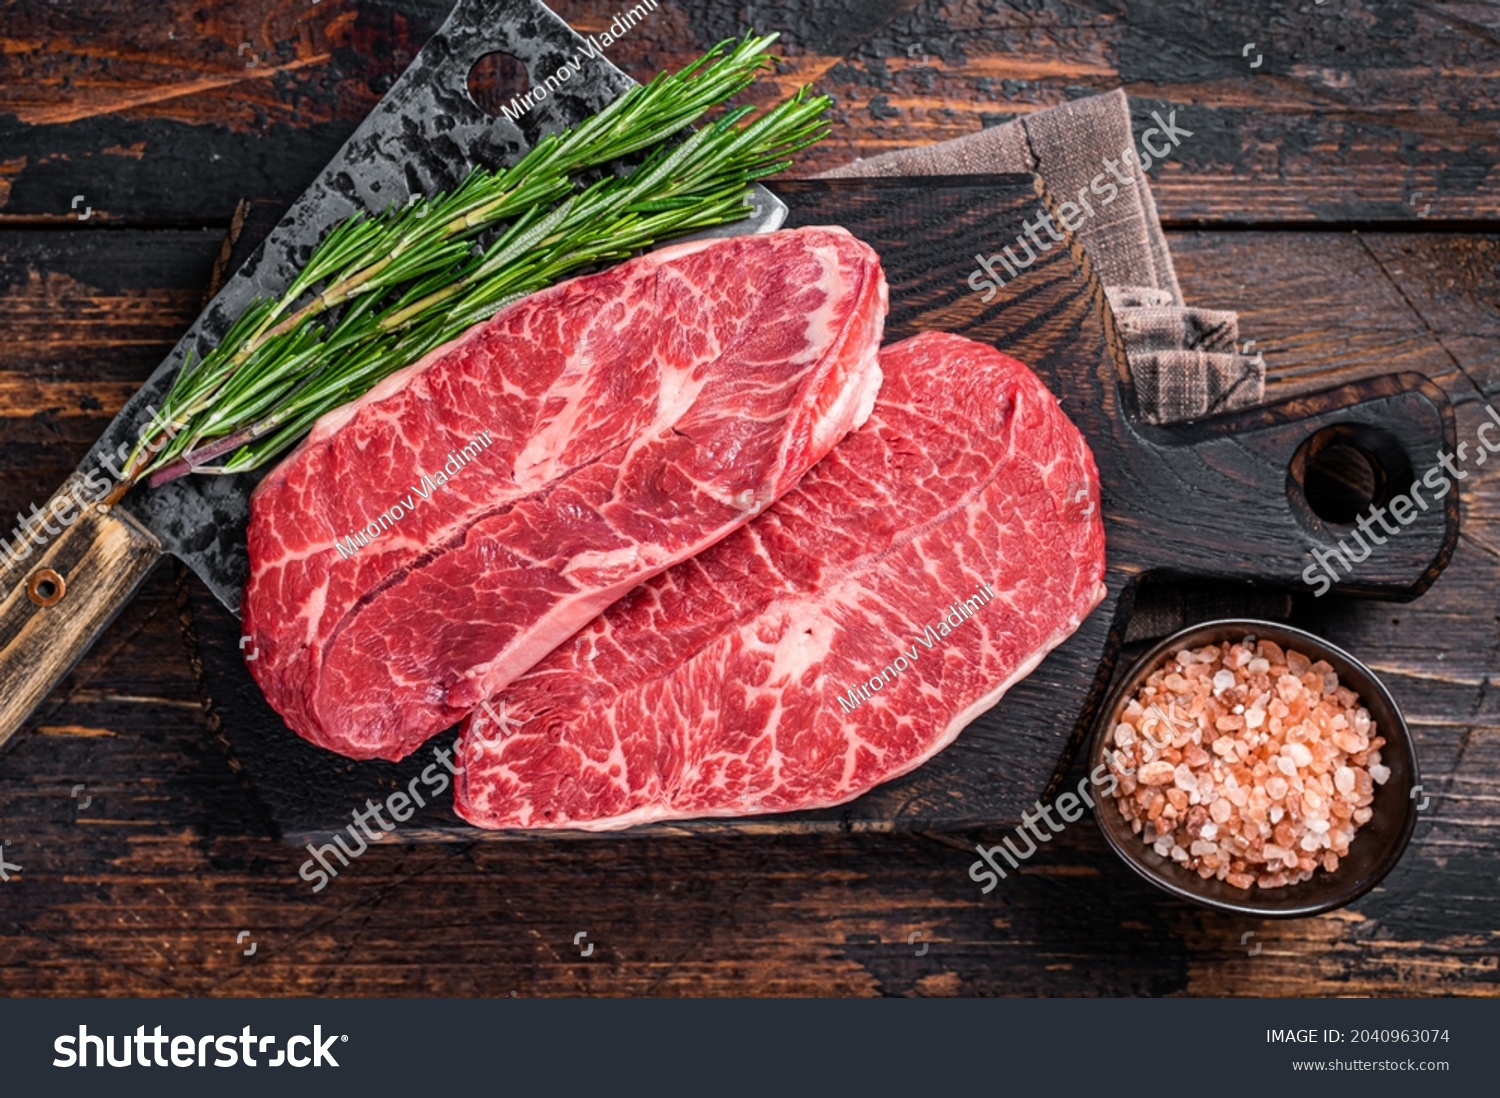 Uncooked Raw Shoulder Top Blade or flat iron beef meat steaks on a wooden butcher board with meat cleaver. Dark wooden background. Top View #2040963074